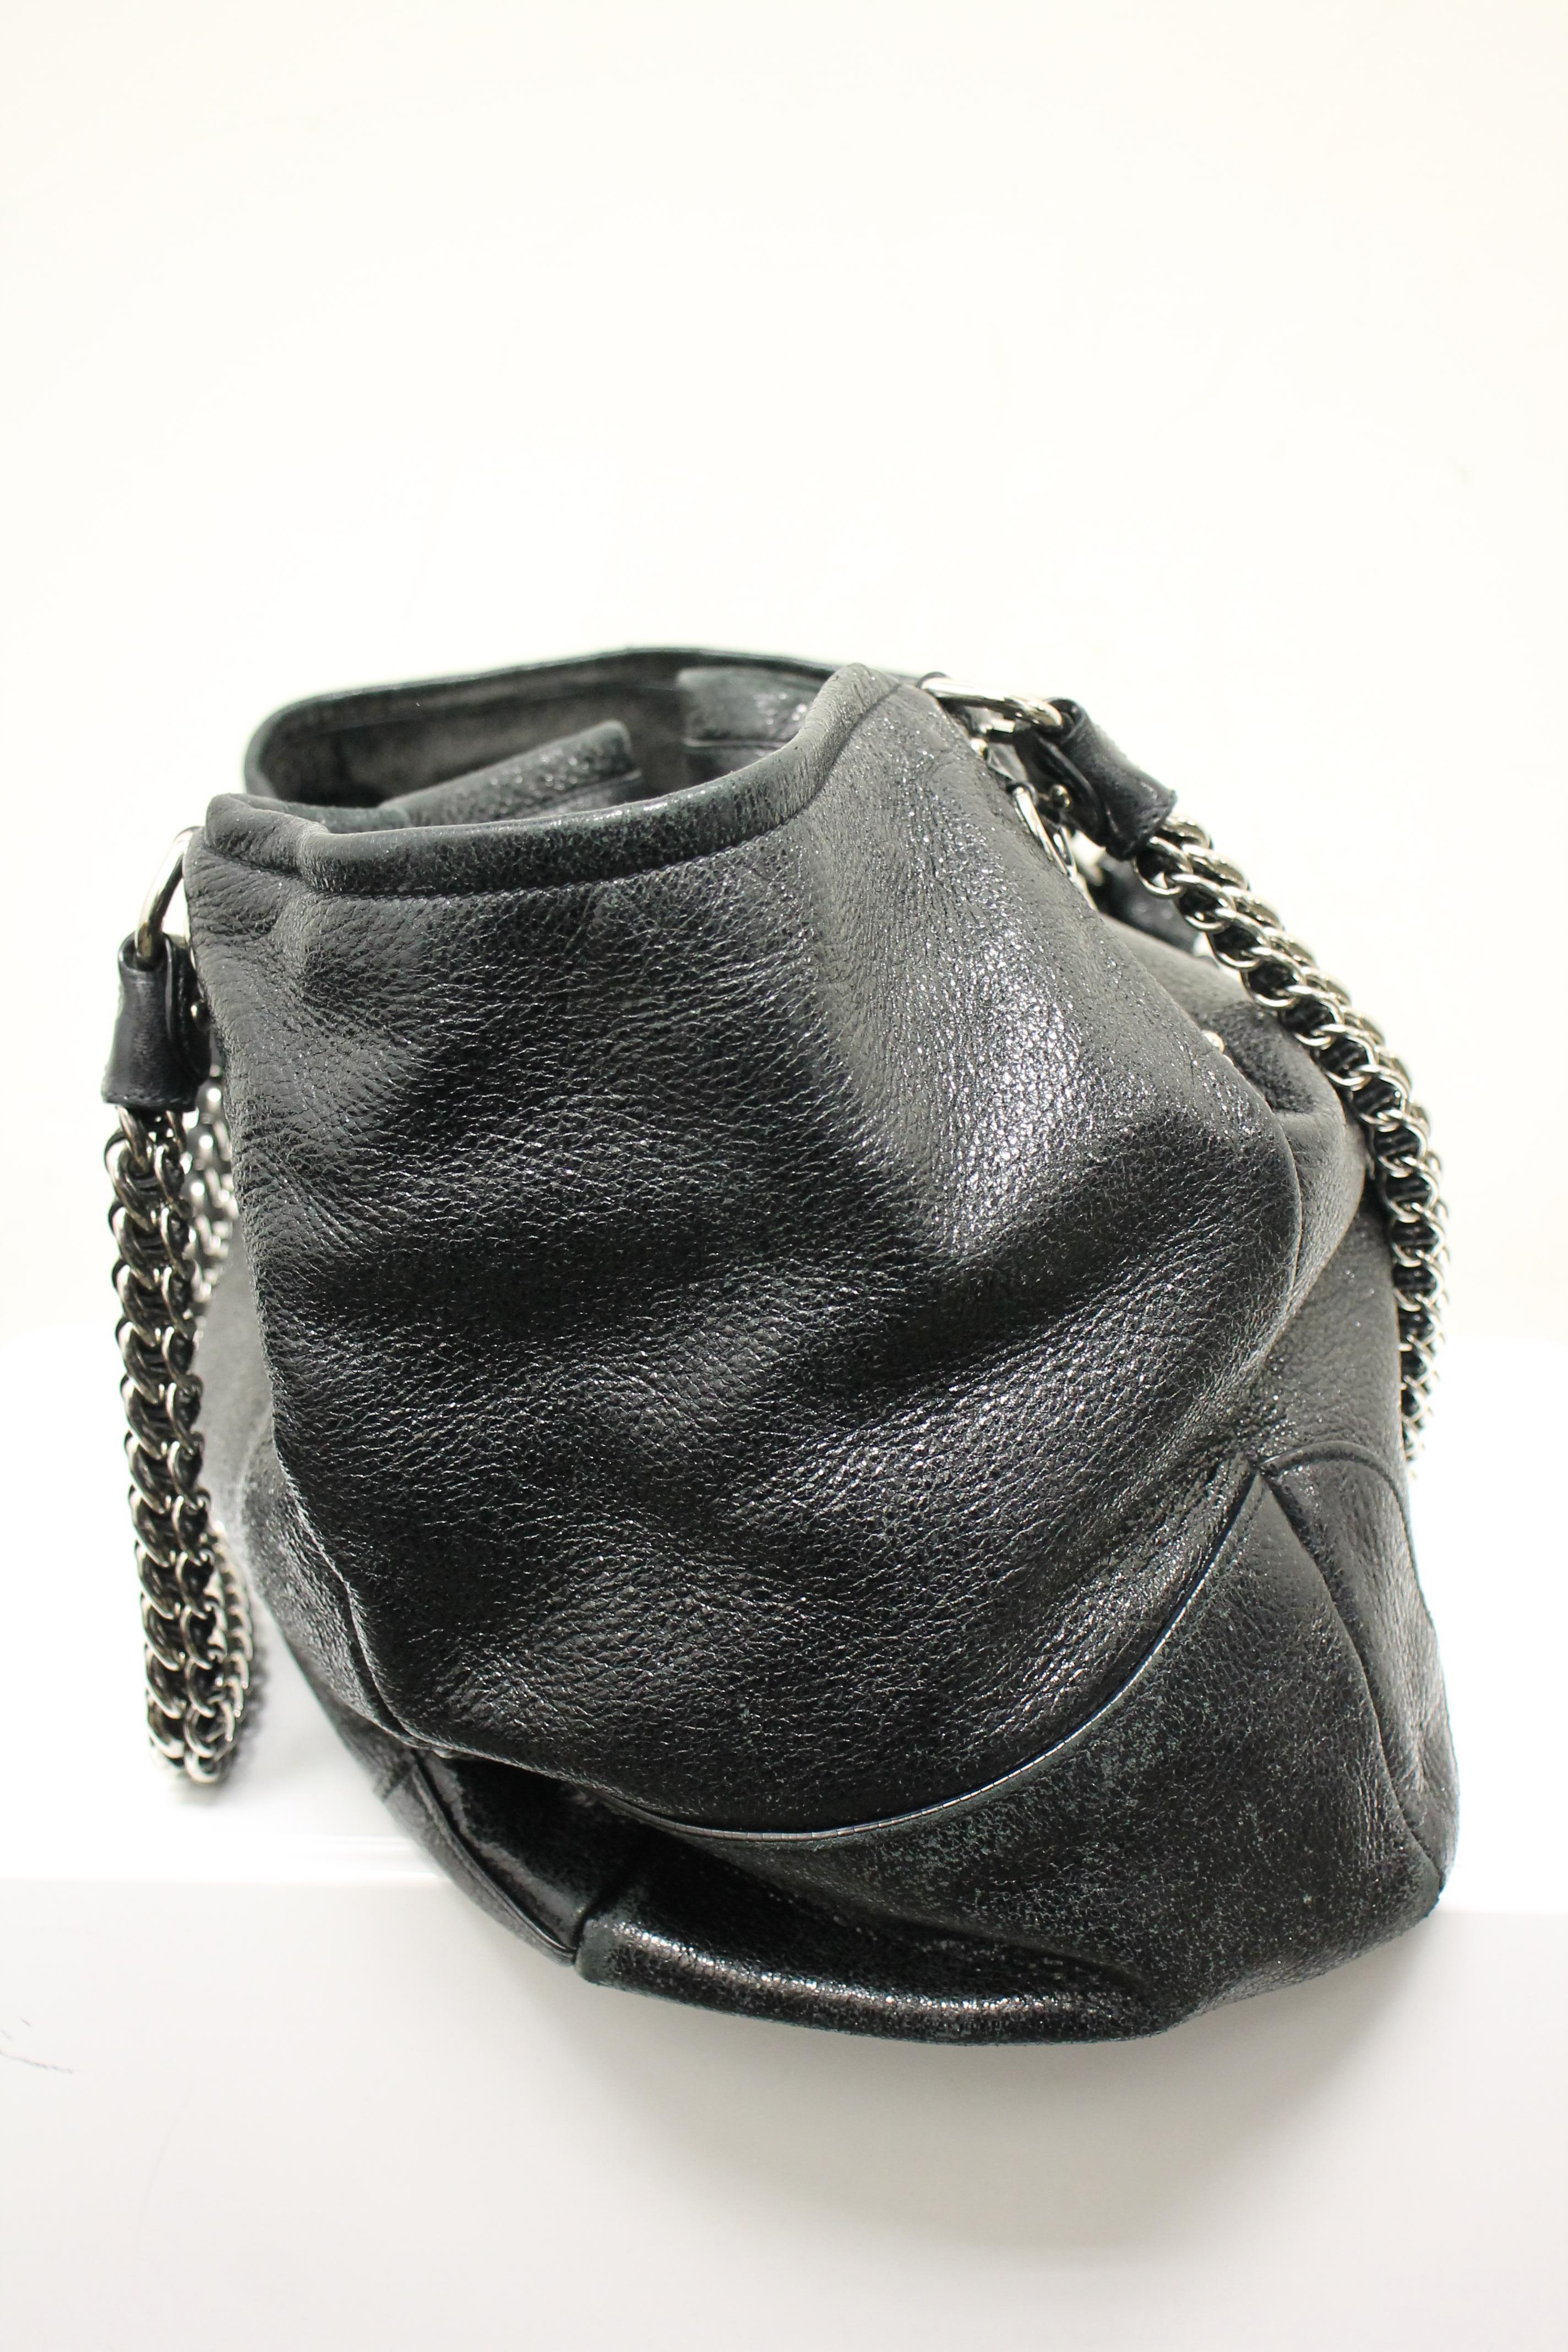 Black metallic sparkled leather. Silver-tone hardware. Magentic snap closure at top. Dual top heavy chain shoulder straps. Logo at front. Lined interior. One interior opened pocket. One interior zippered pocket.